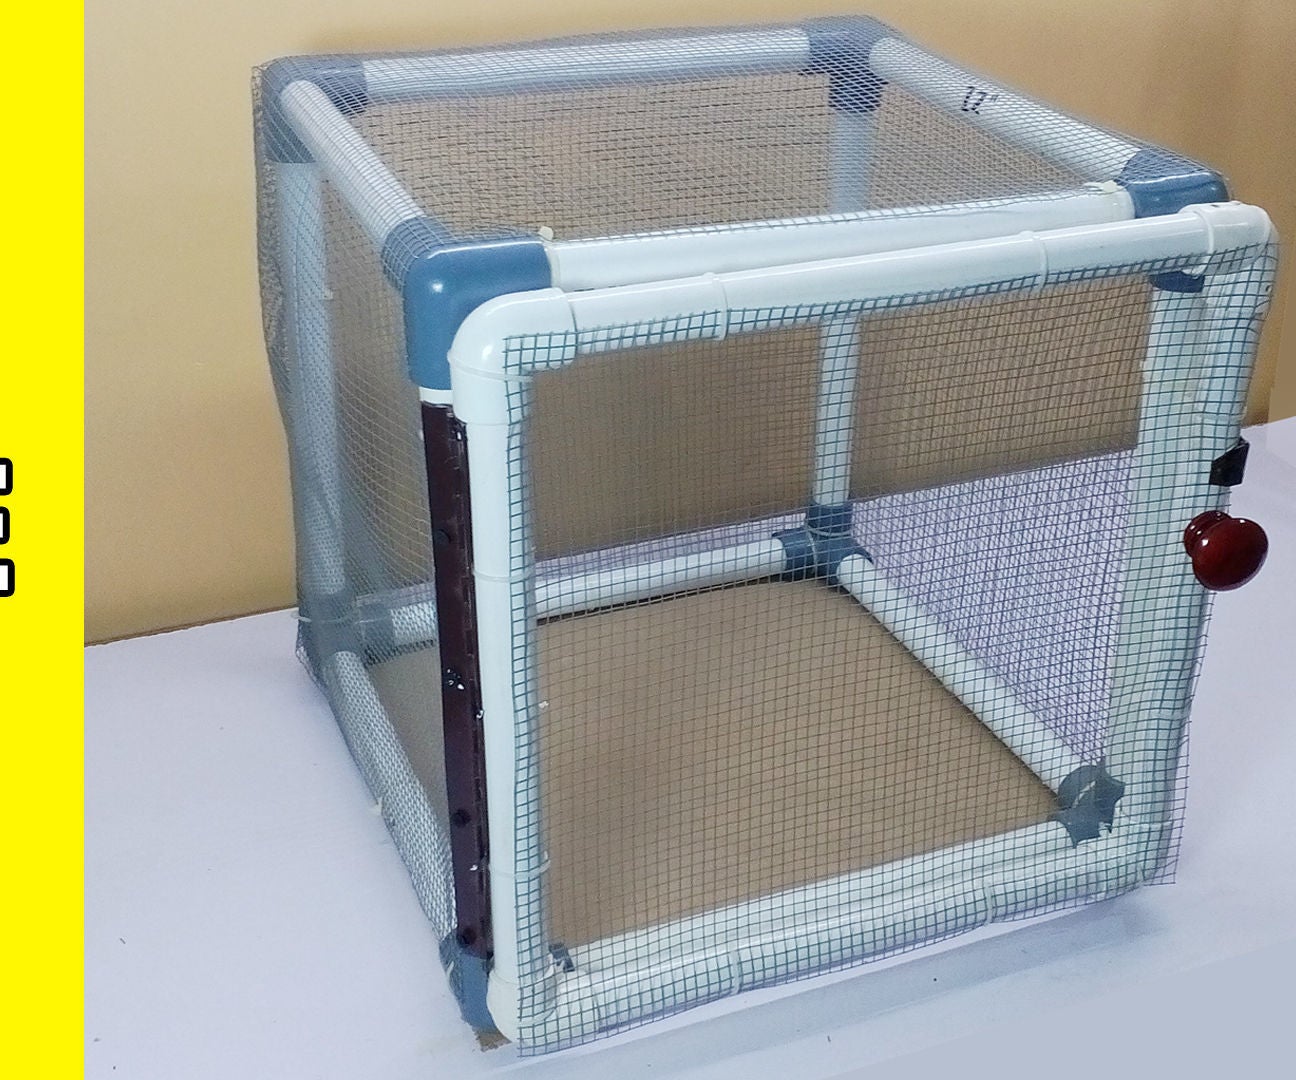 Make Pvc Pipe Cage - Pvc Projects